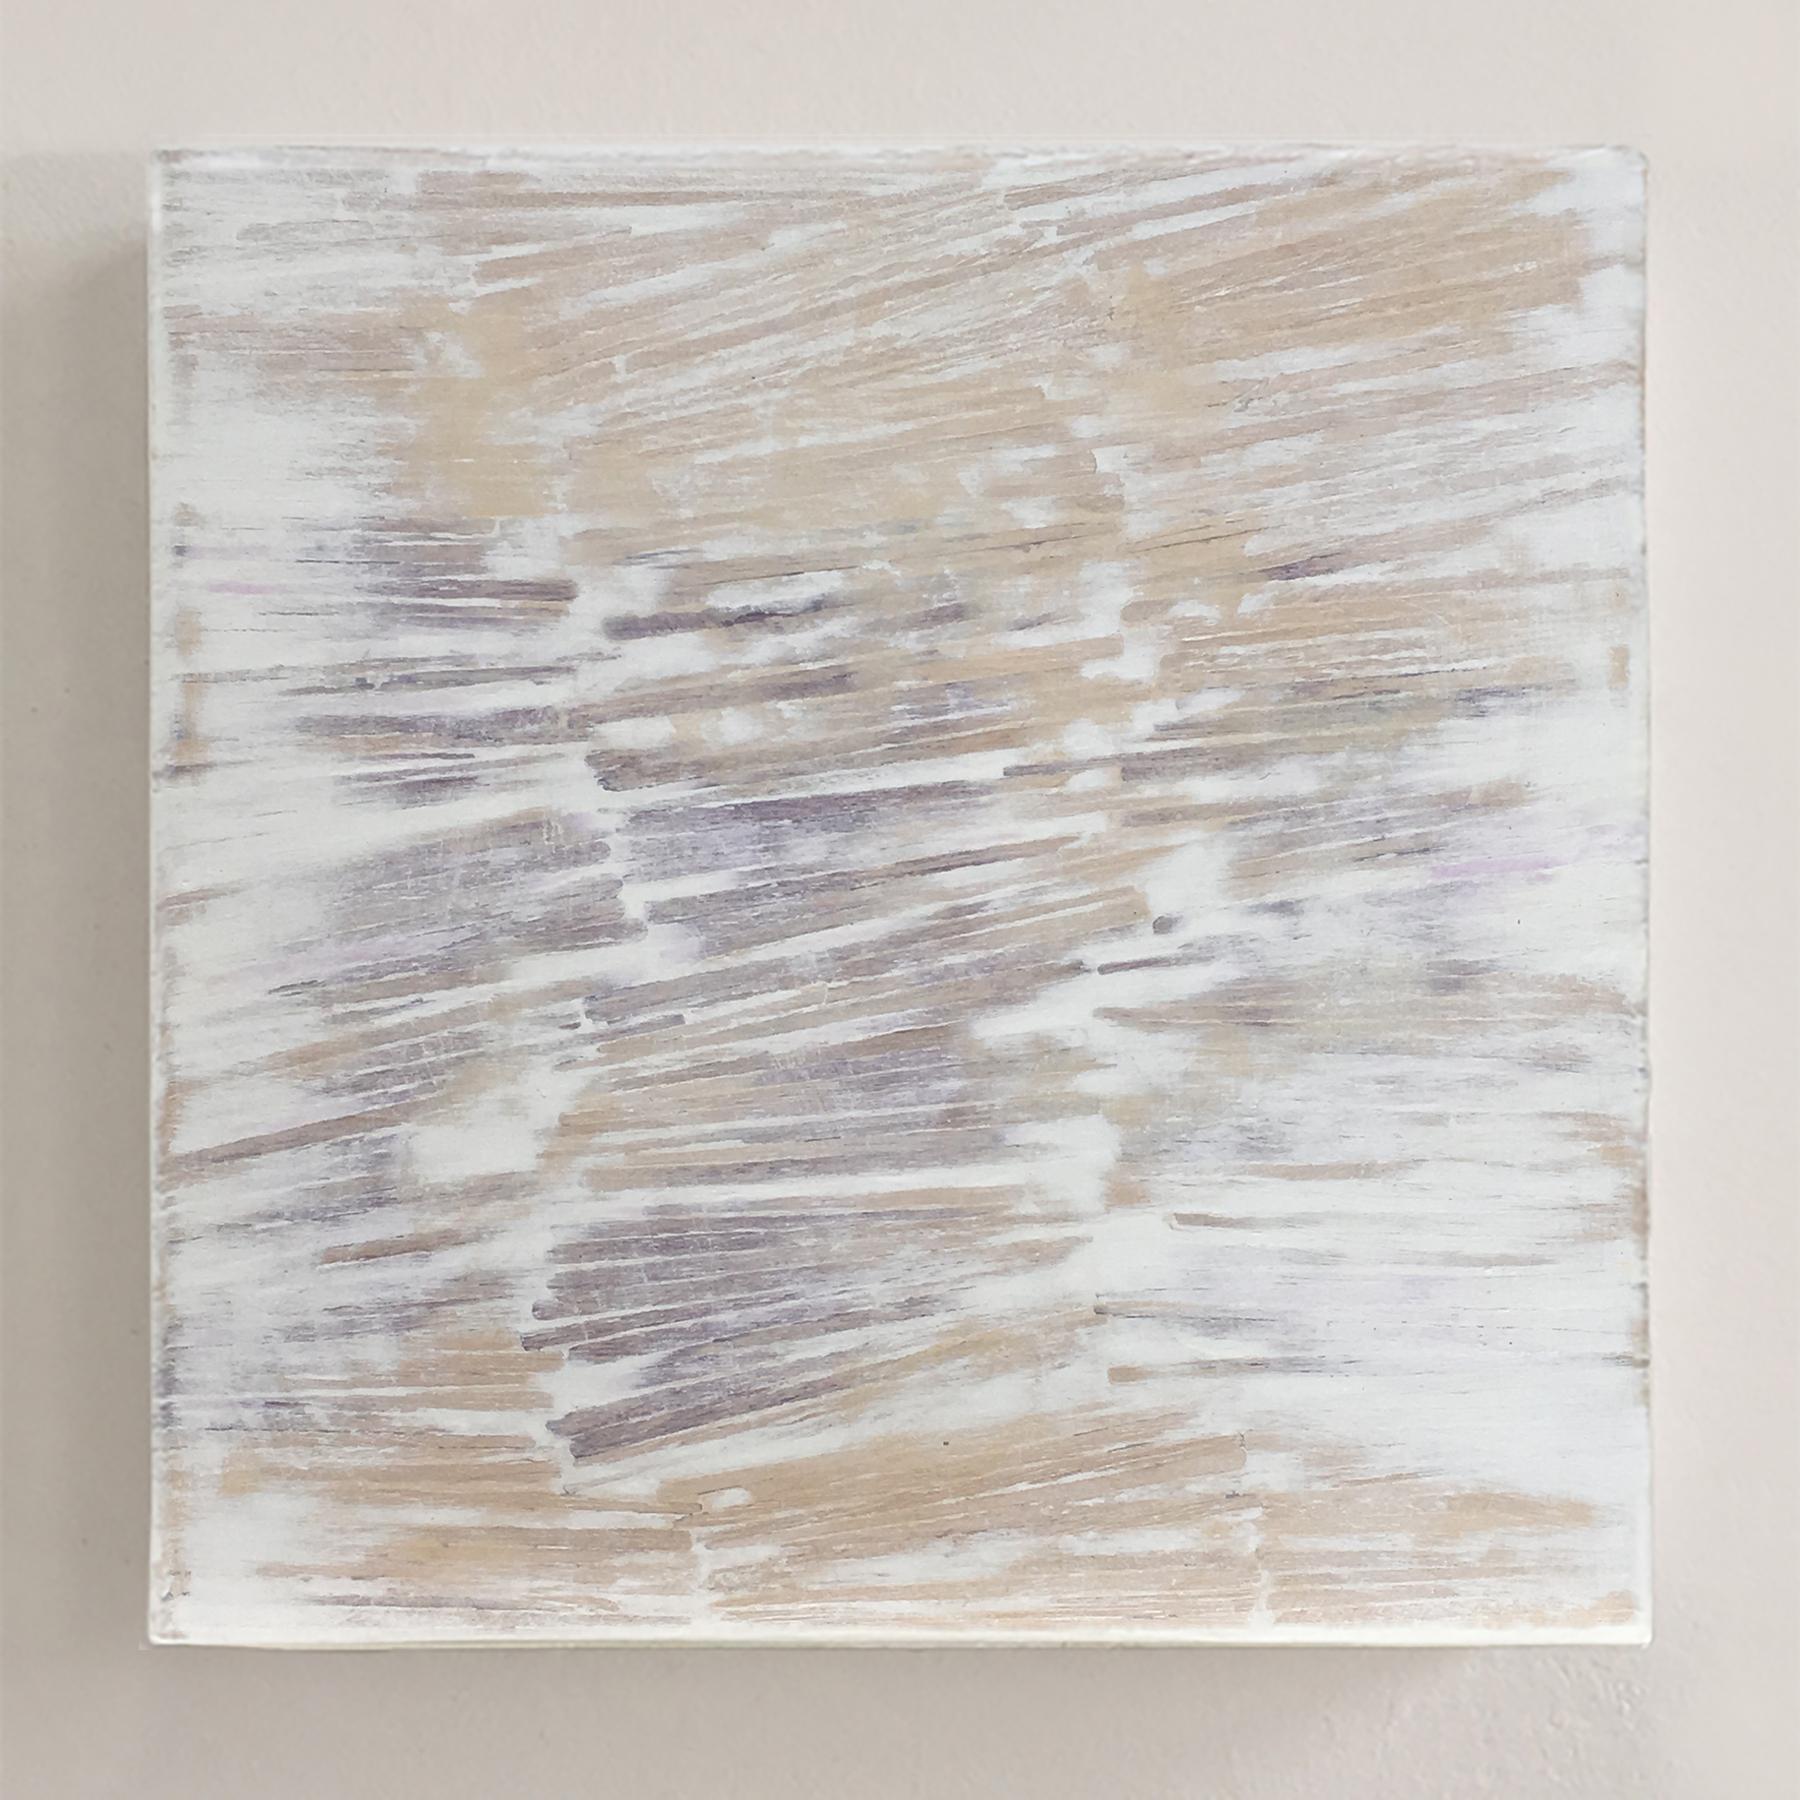 Pauline Galiana Abstract Painting - 3B60-13, neutral toned, white monochromatic gestural abstract